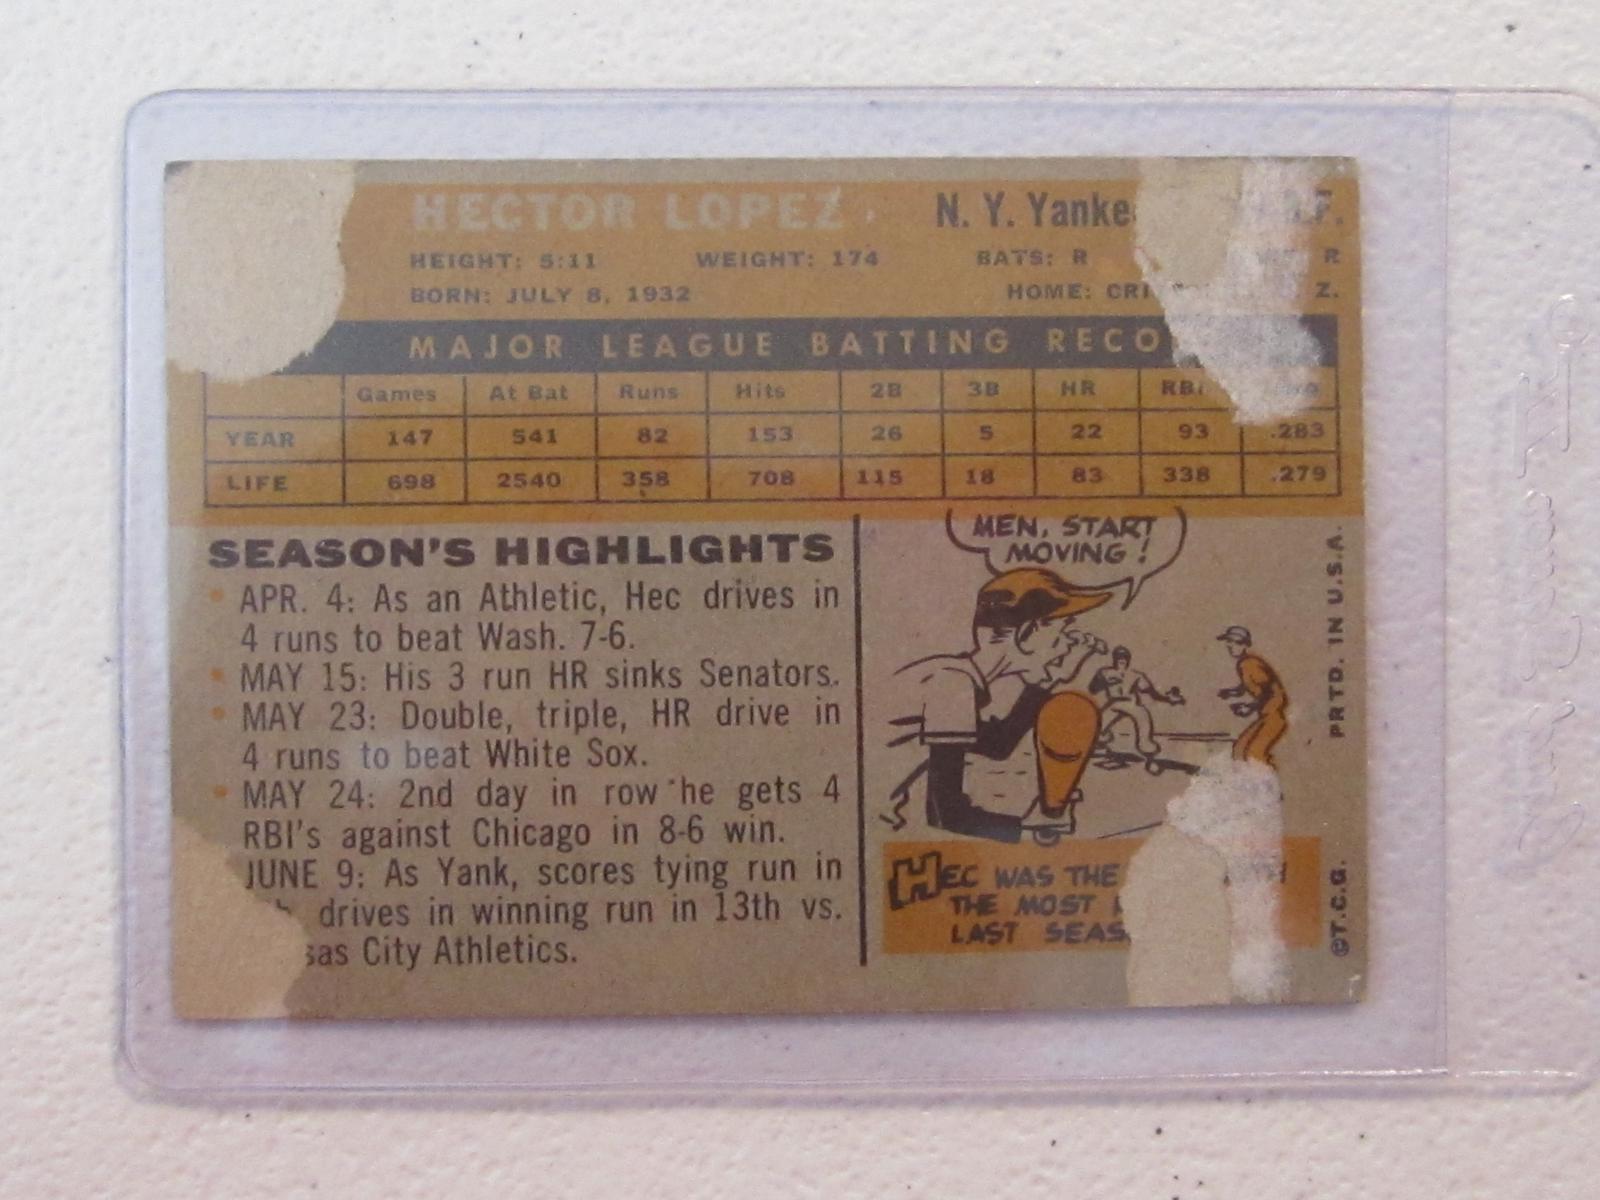 1960 TOPPS HECTOR LOPEZ VINTAGE